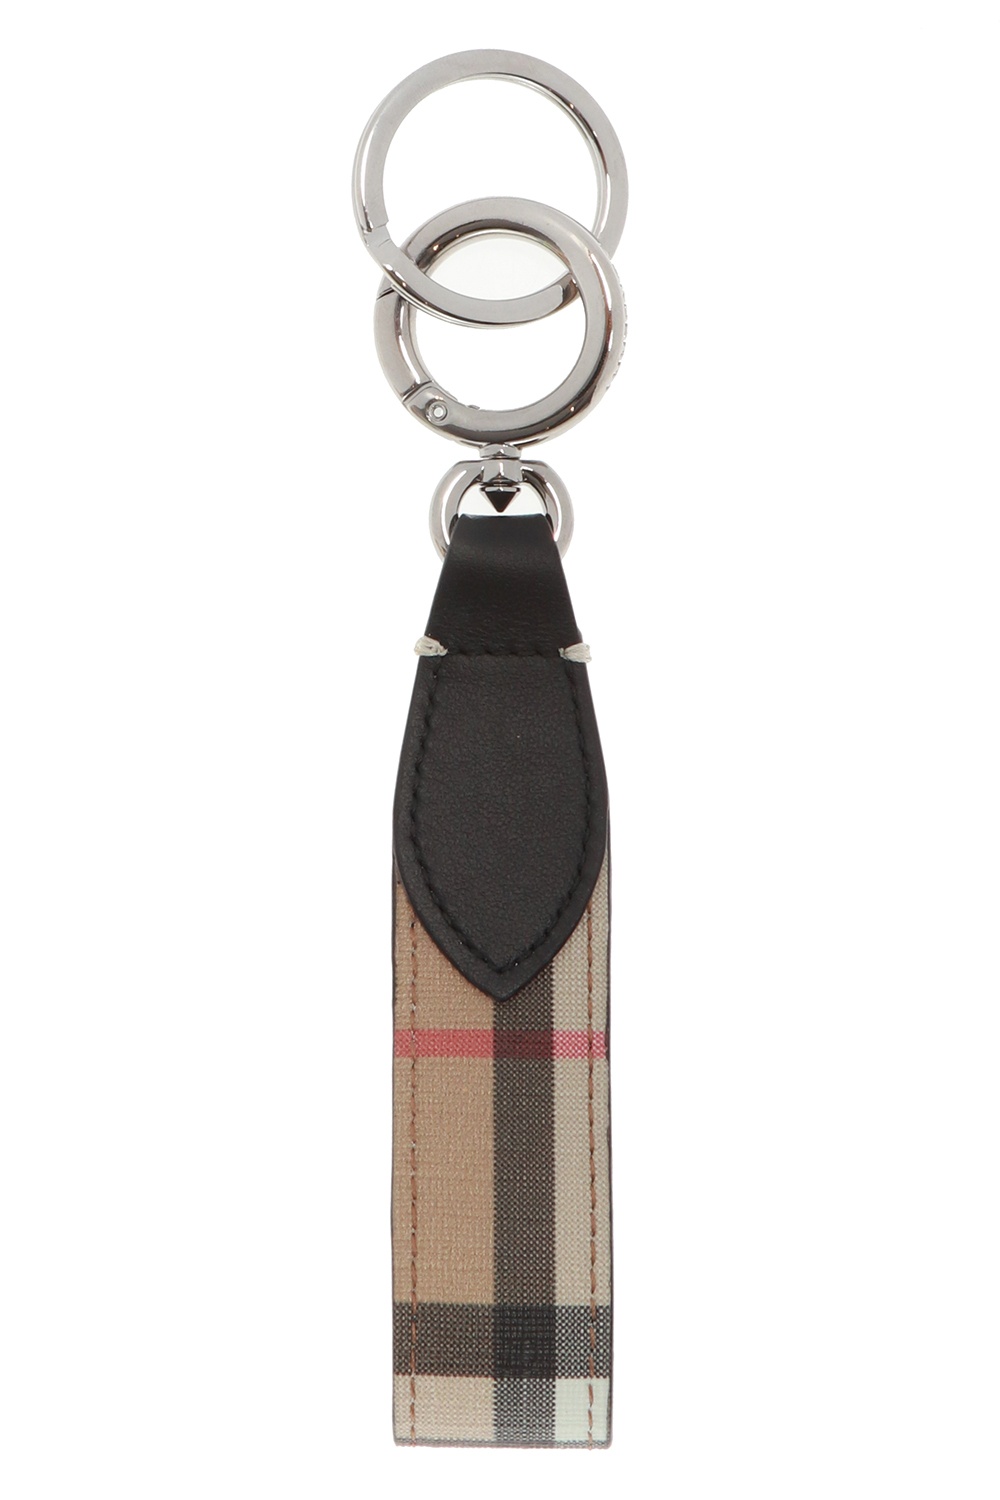 Burberry Check key ring, Men's Accessories